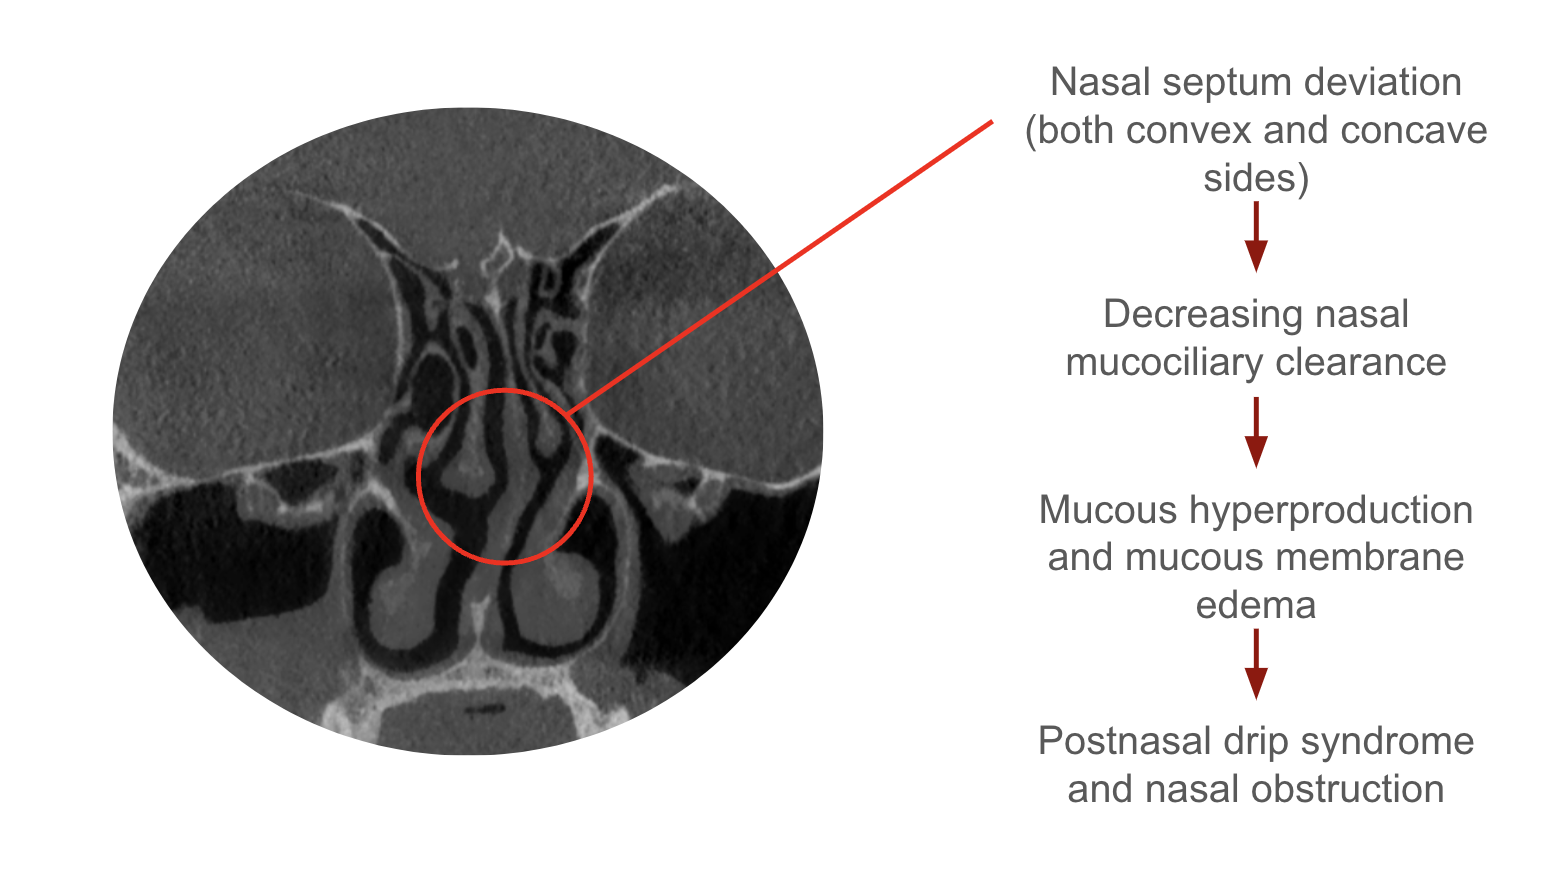 Types of the nasal septum deviations and their influence on the state of mucociliary clearance of the nasal cavity in patients with postnasal obstruction syndrome